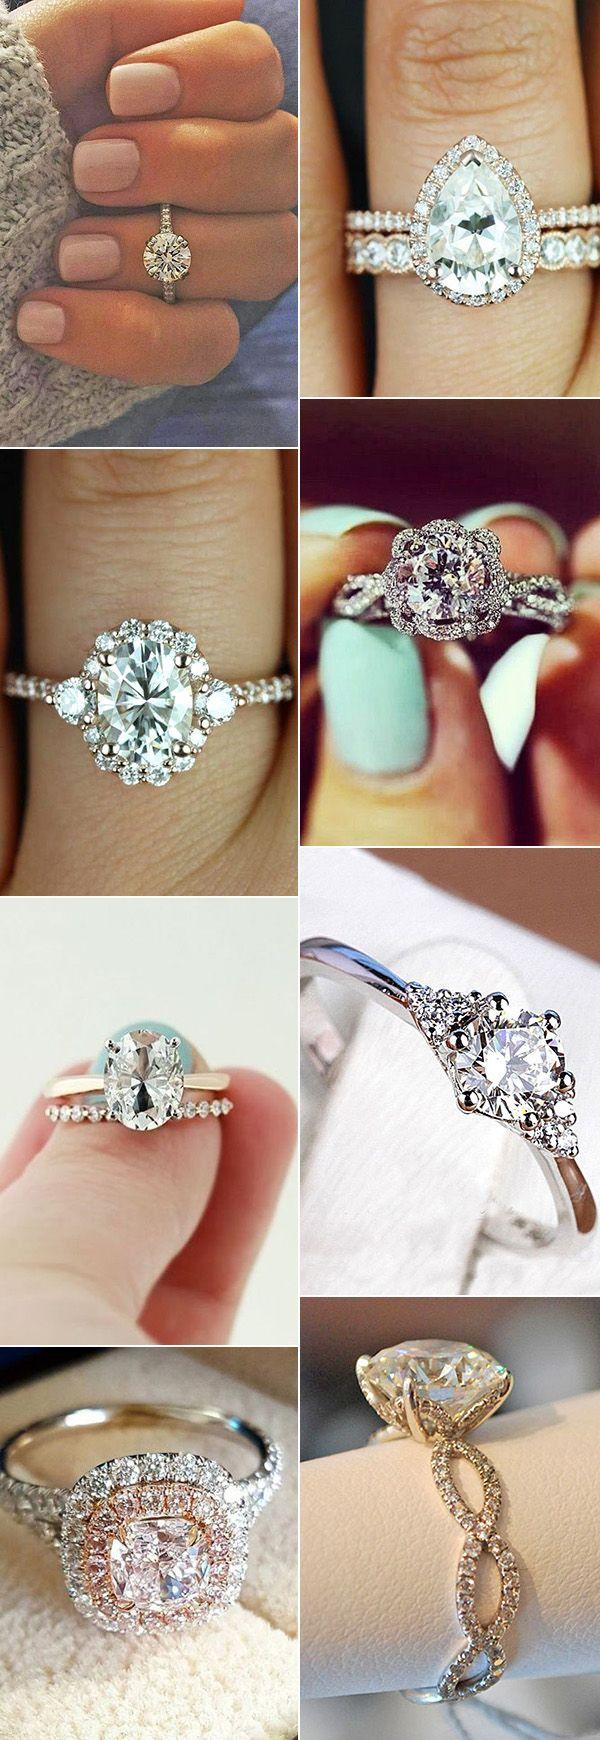 Mariage - 20 Amazing Wedding Engagement Rings For 2017 Trends